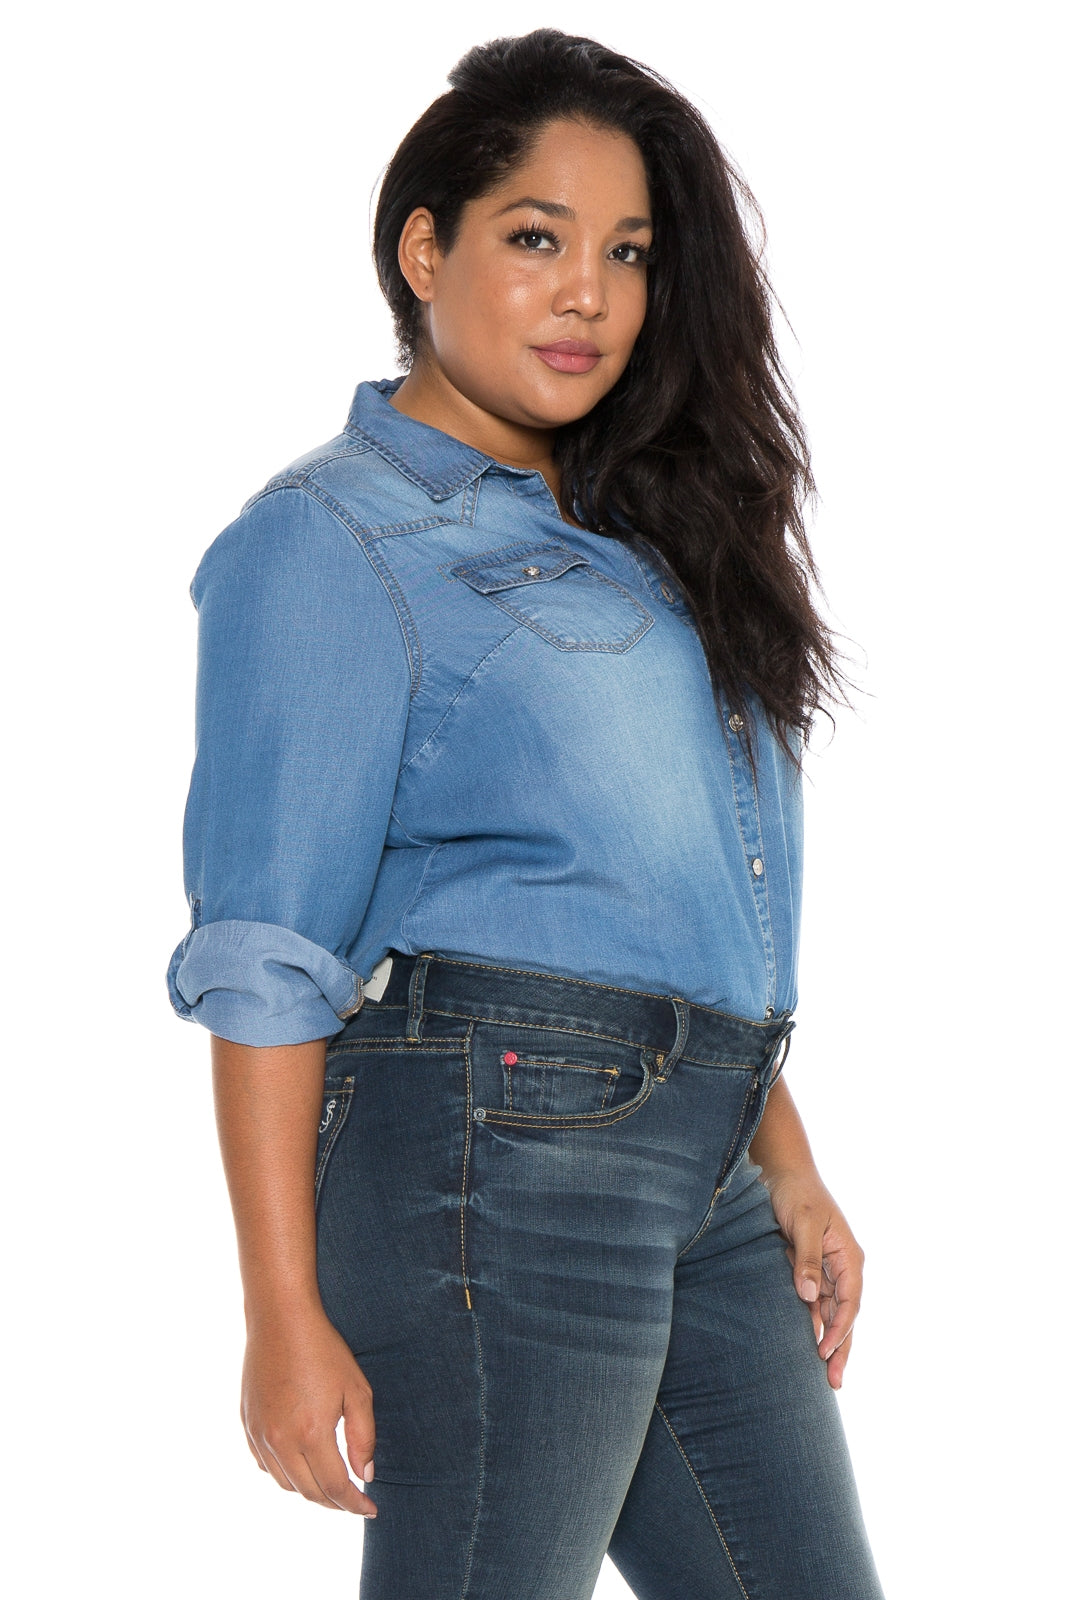 Western Shirt - CARLY - SLINK JEANS